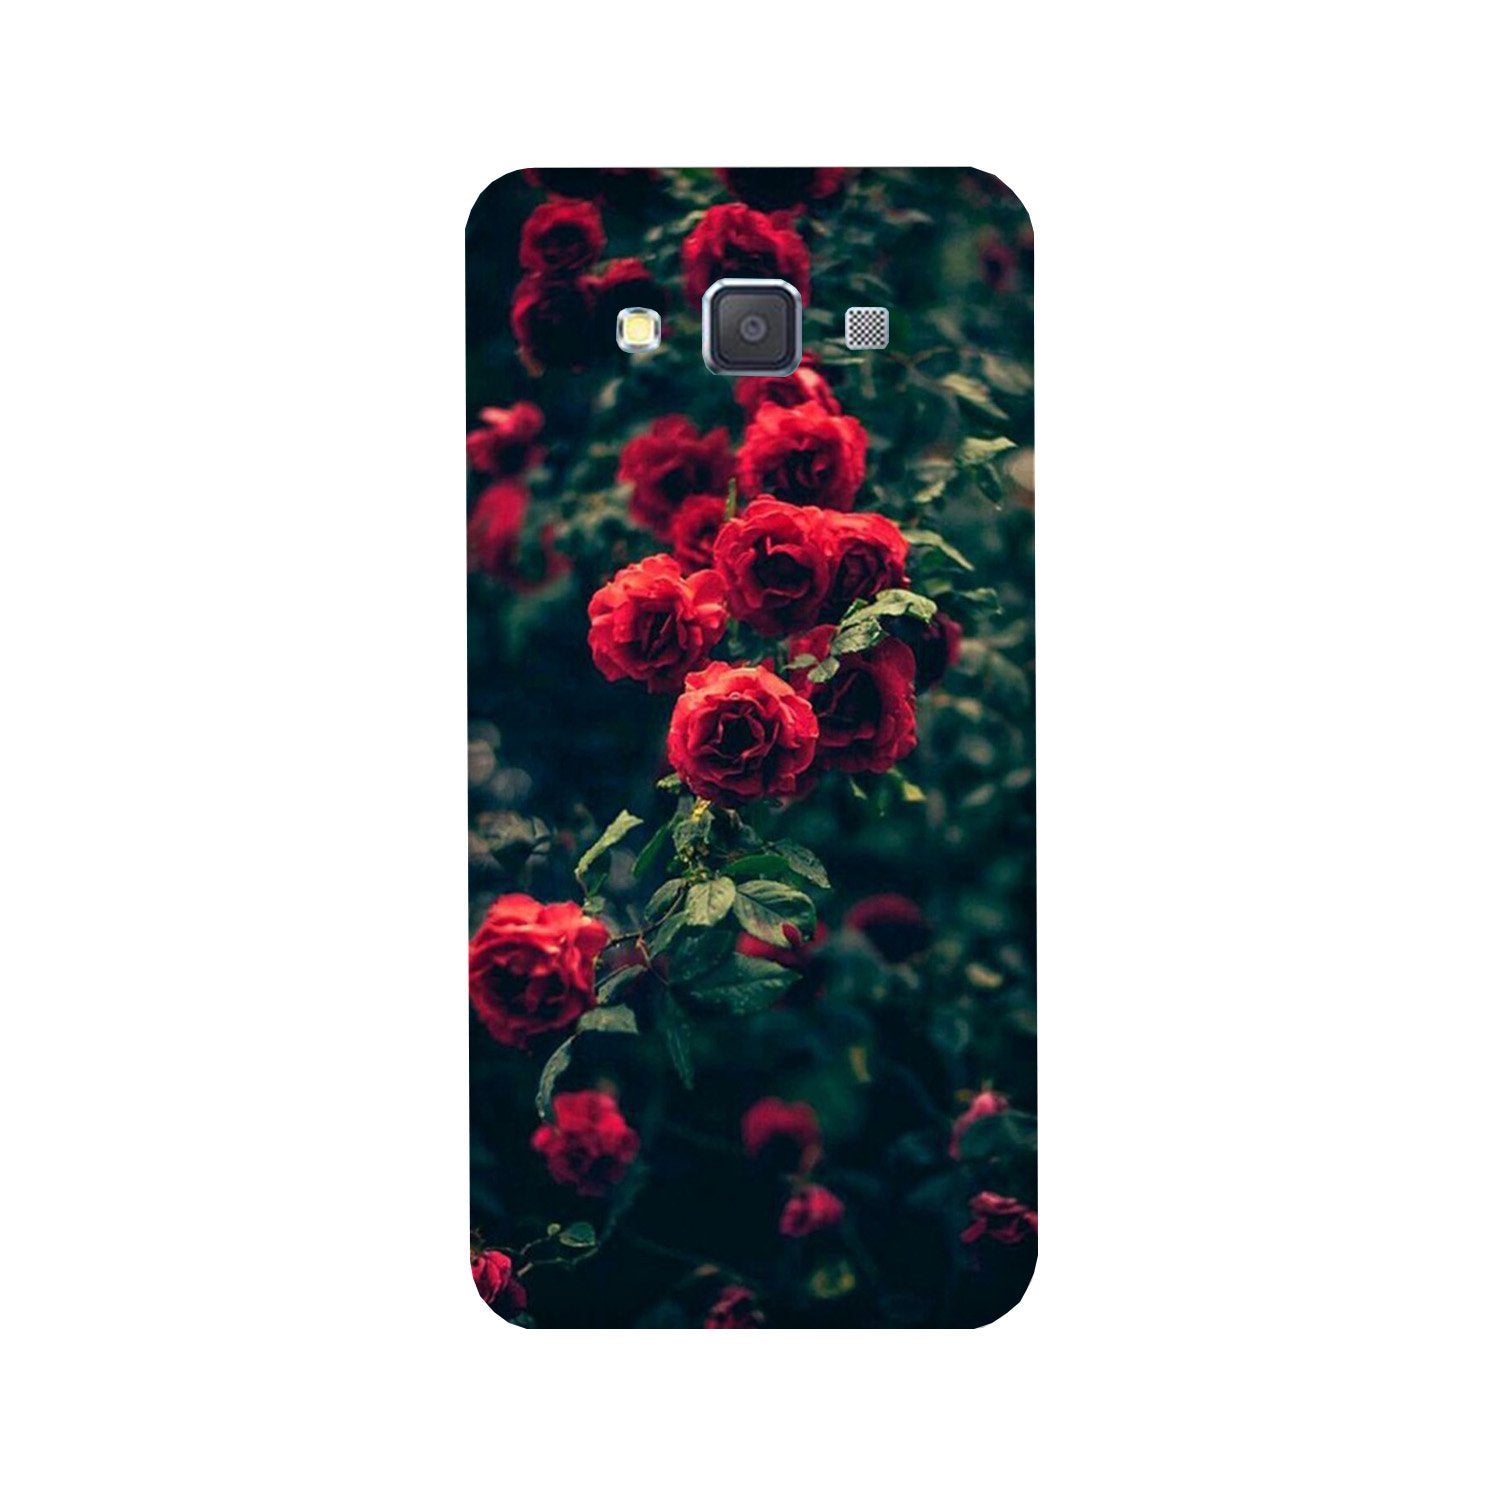 Red Rose Case for Galaxy Grand Prime